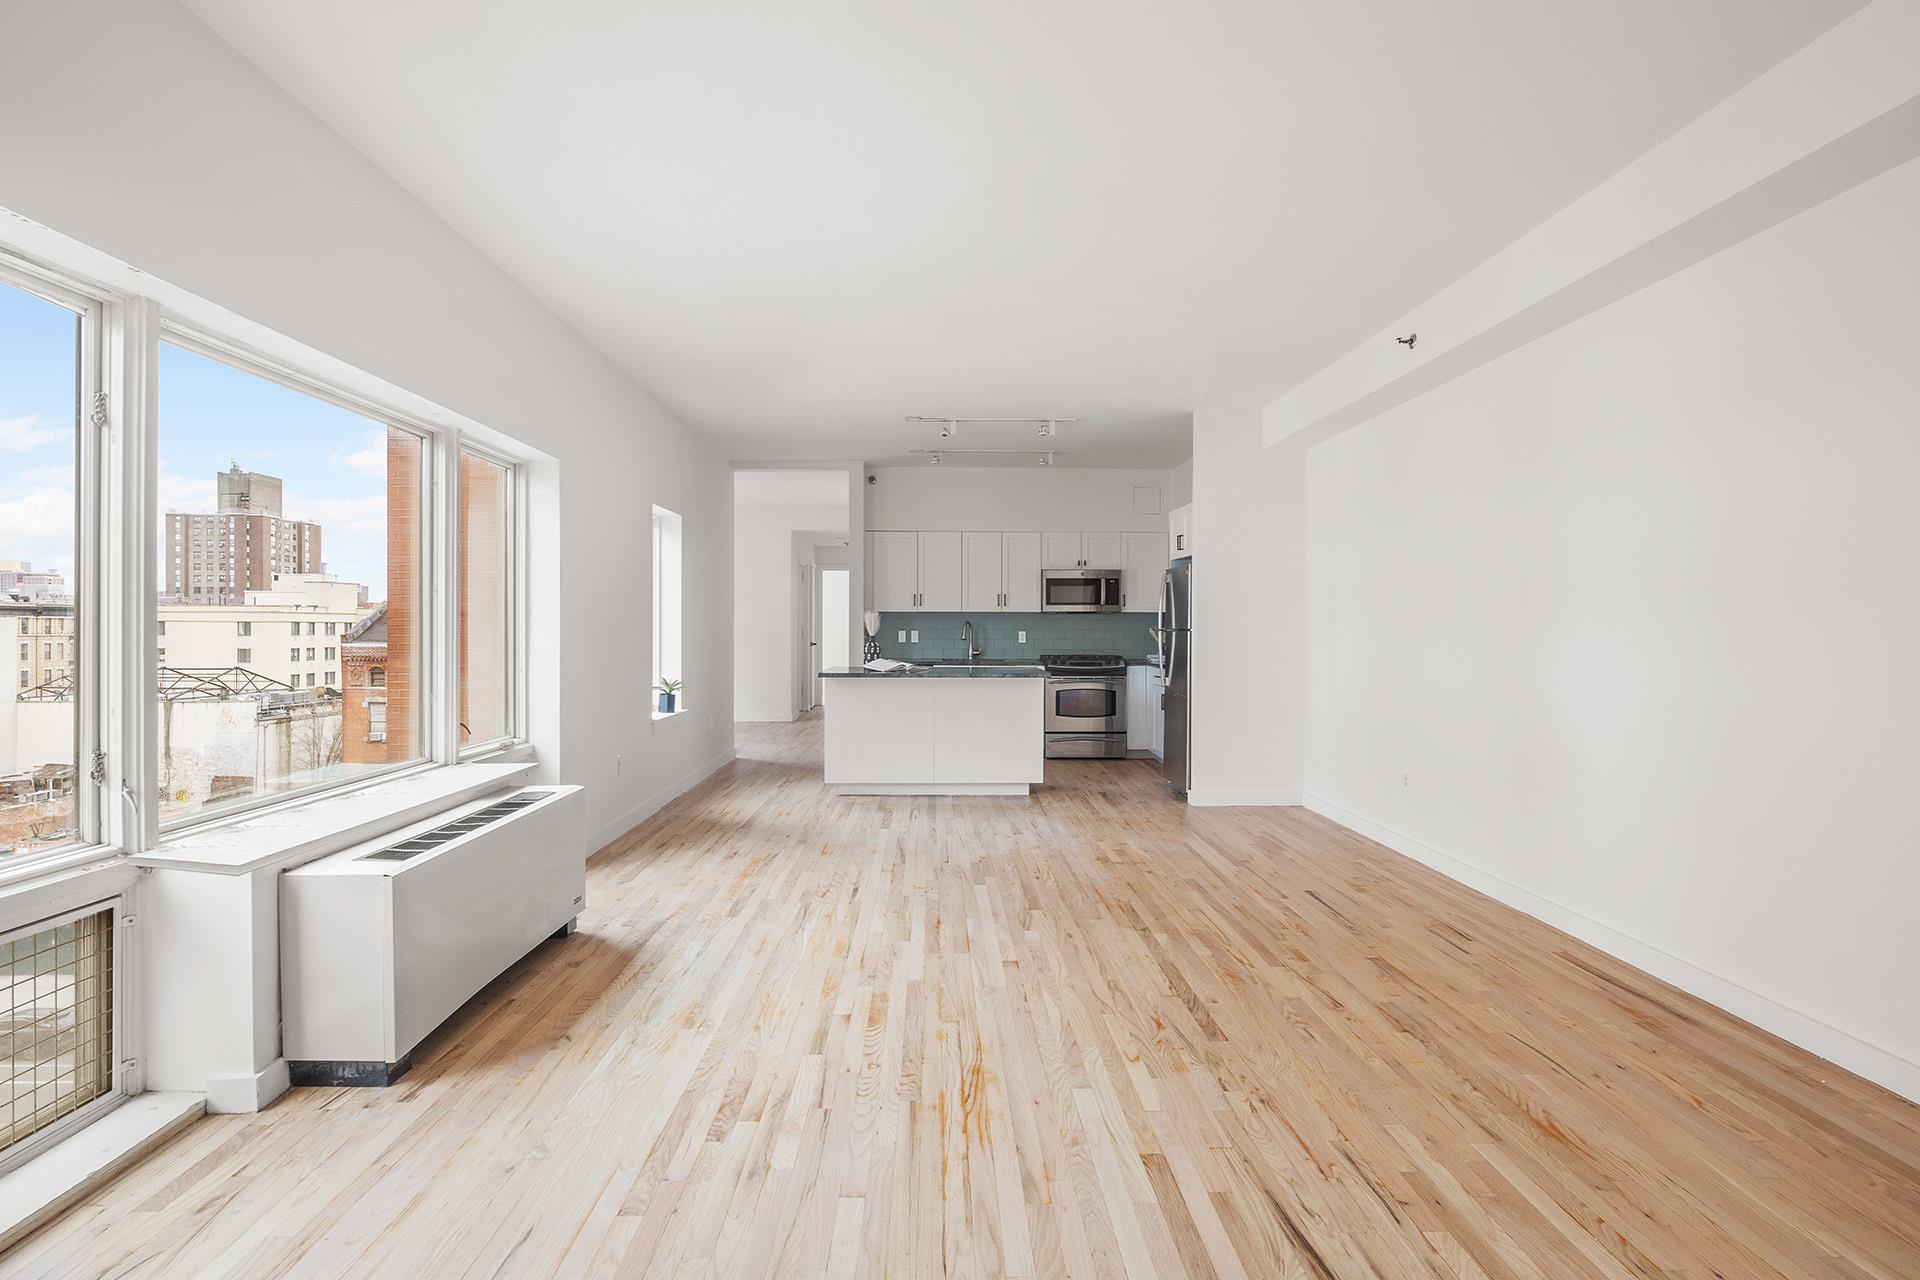 304 West 115th Street 6A, South Harlem, Upper Manhattan, NYC - 3 Bedrooms  
2 Bathrooms  
6 Rooms - 